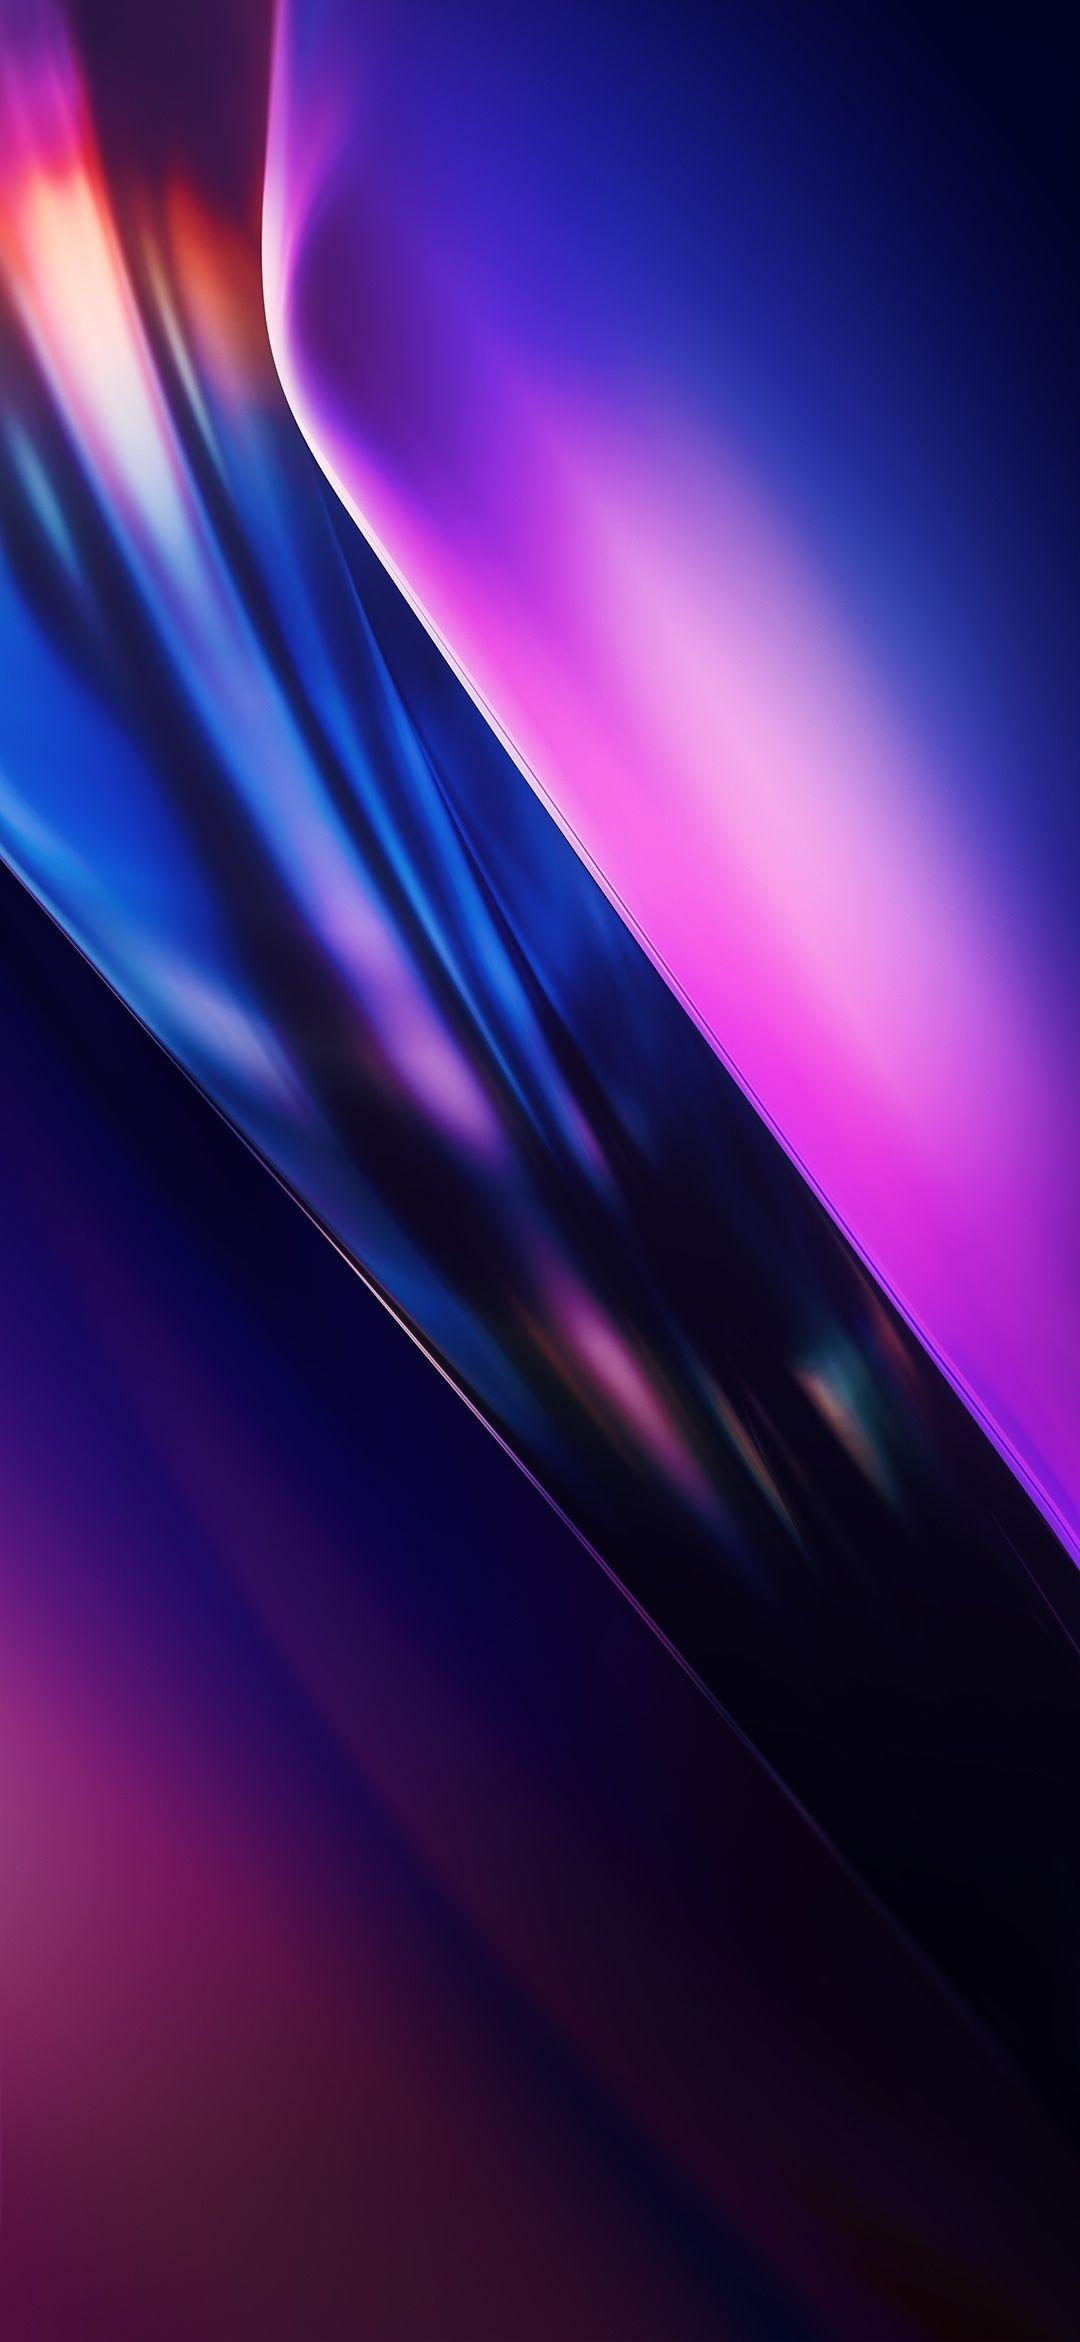 Download OnePlus 7T Official Wallpapers Here! Full